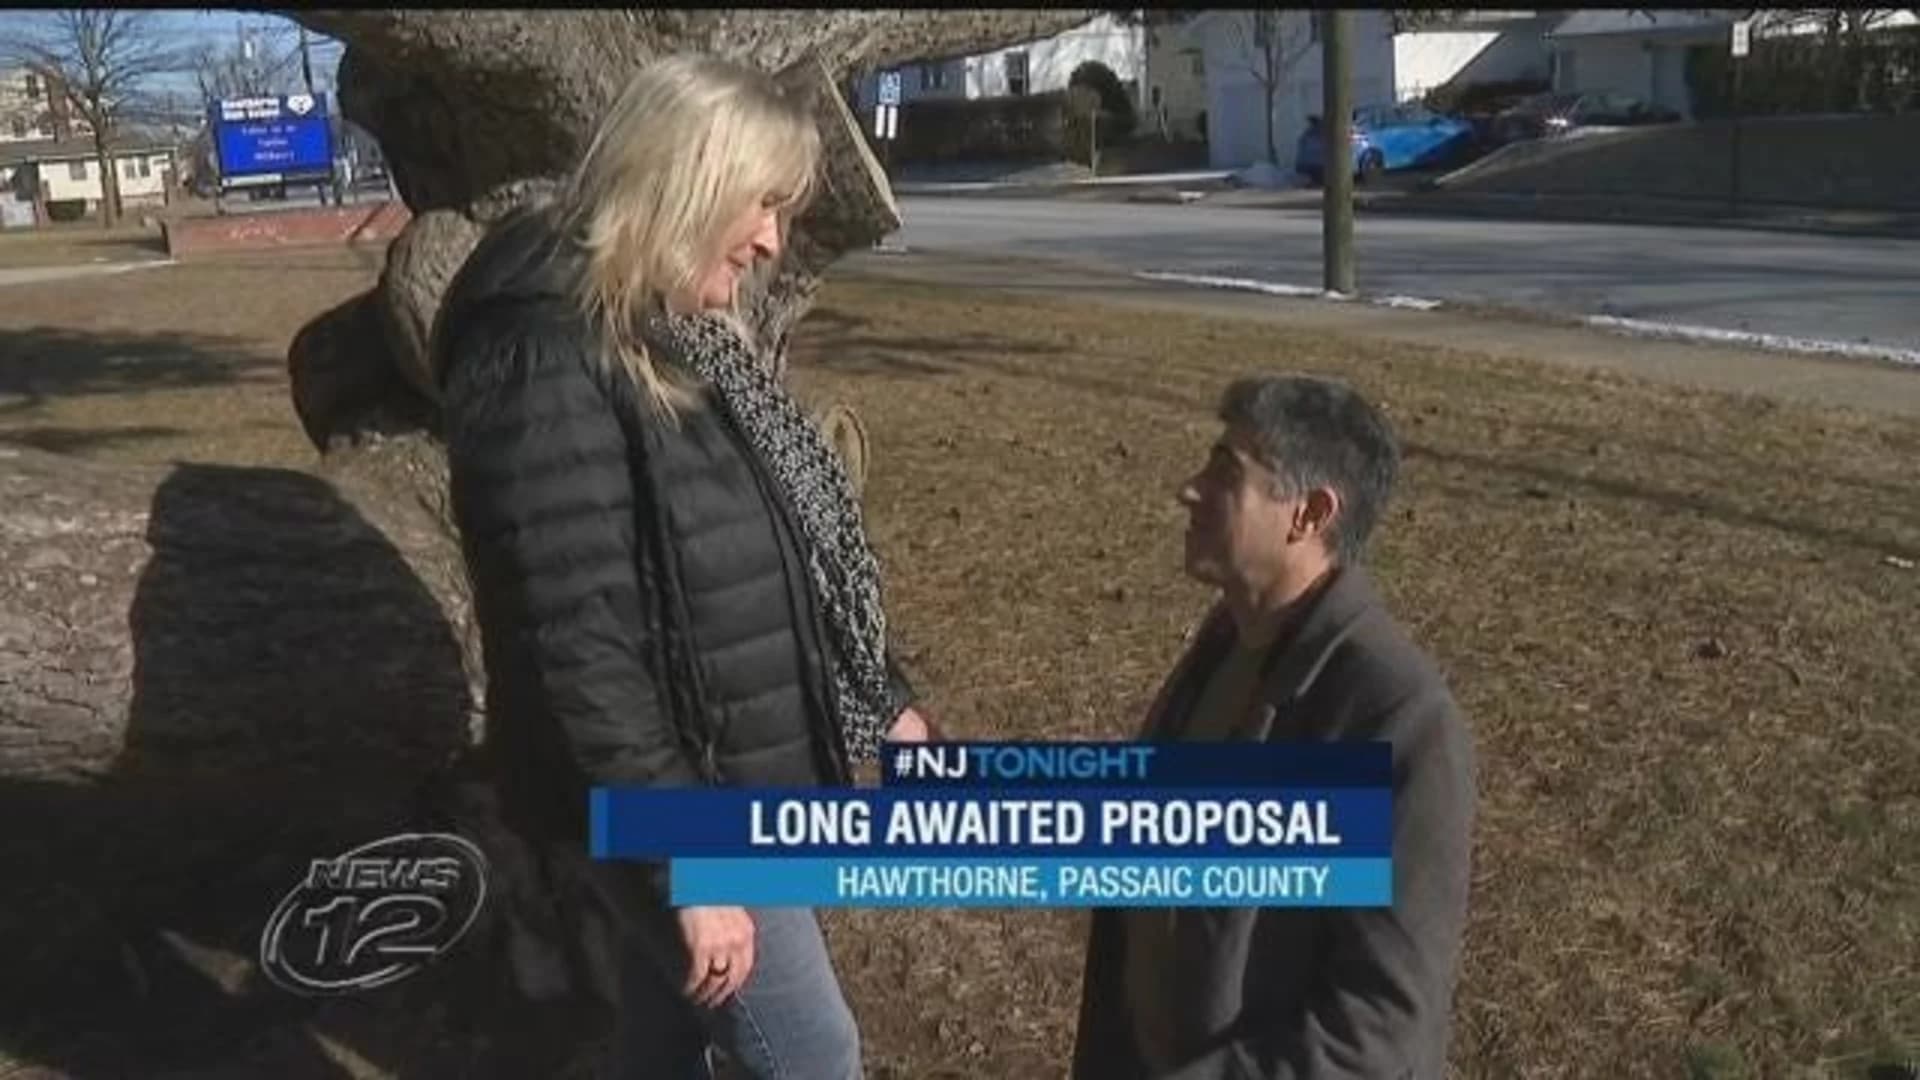 It’s never too late! Man proposes to woman he met in HS 45 years ago